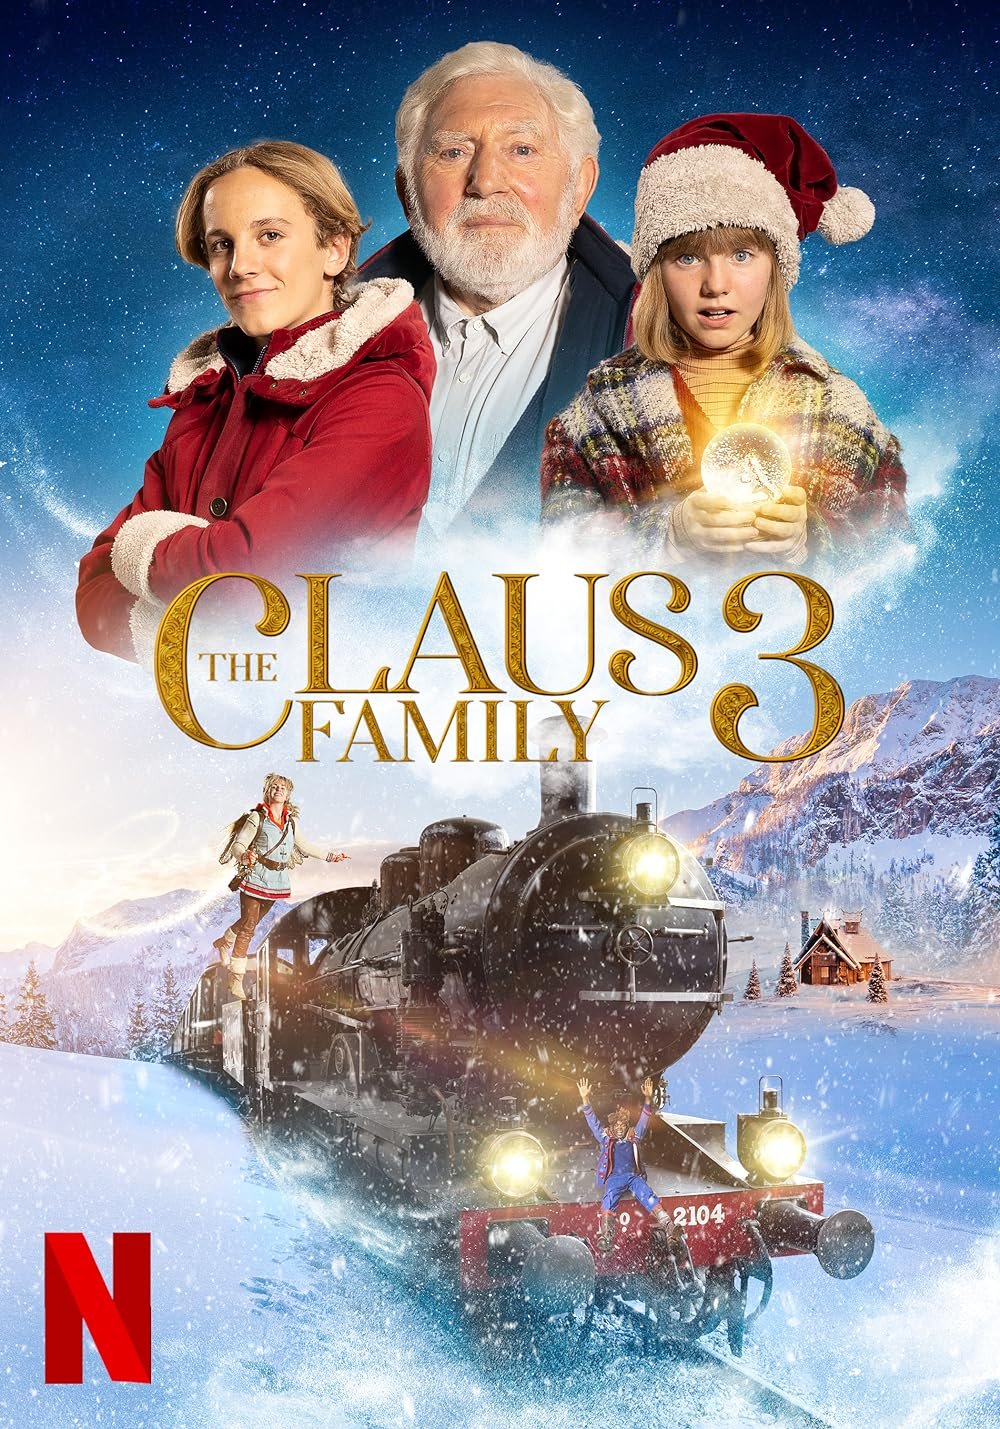 the claus family 3.jpg